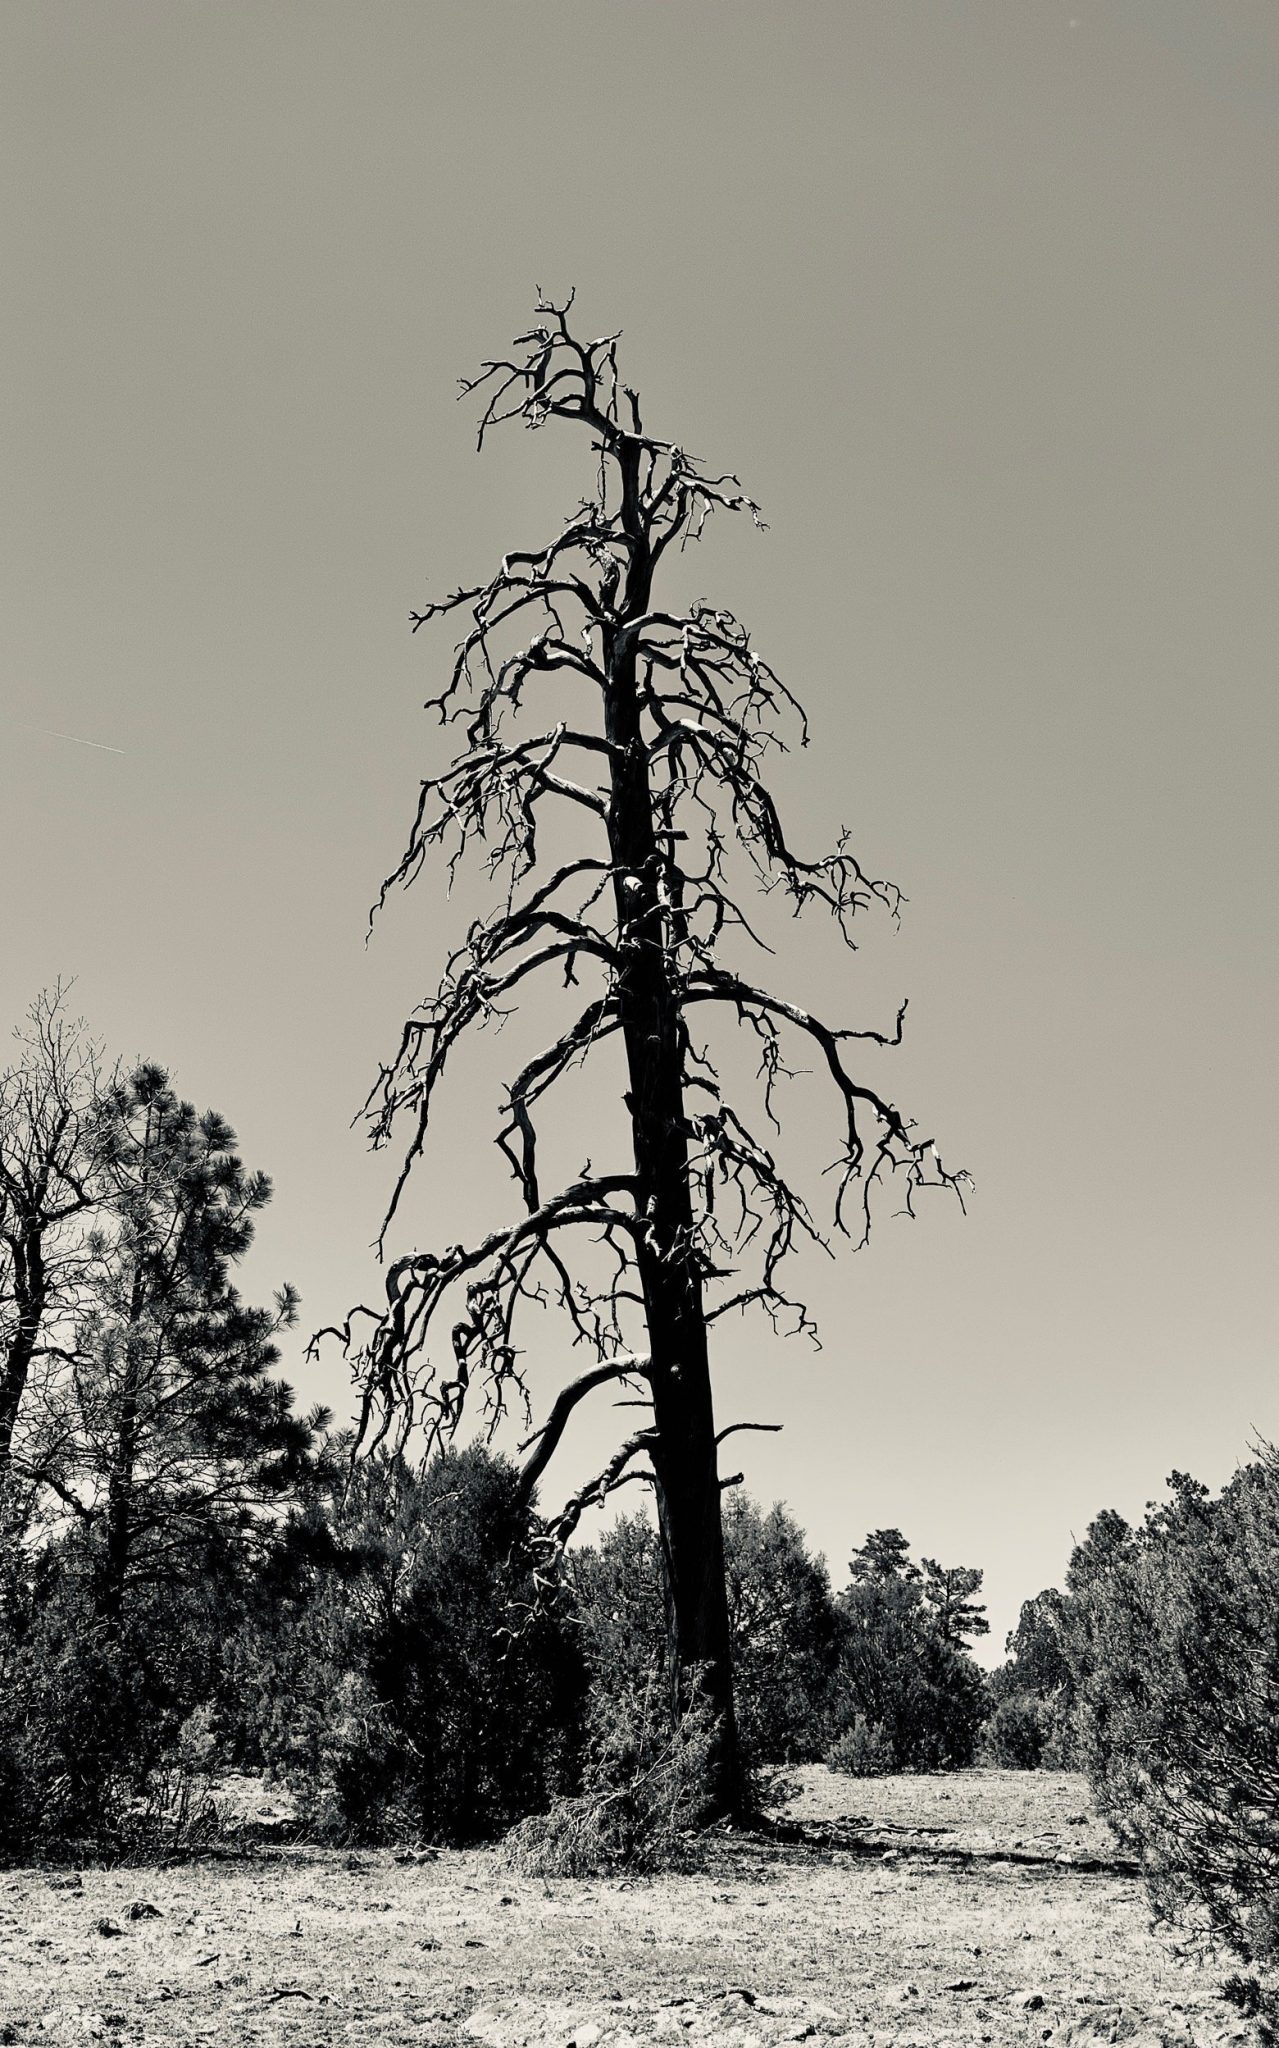 A ghostly dead tree